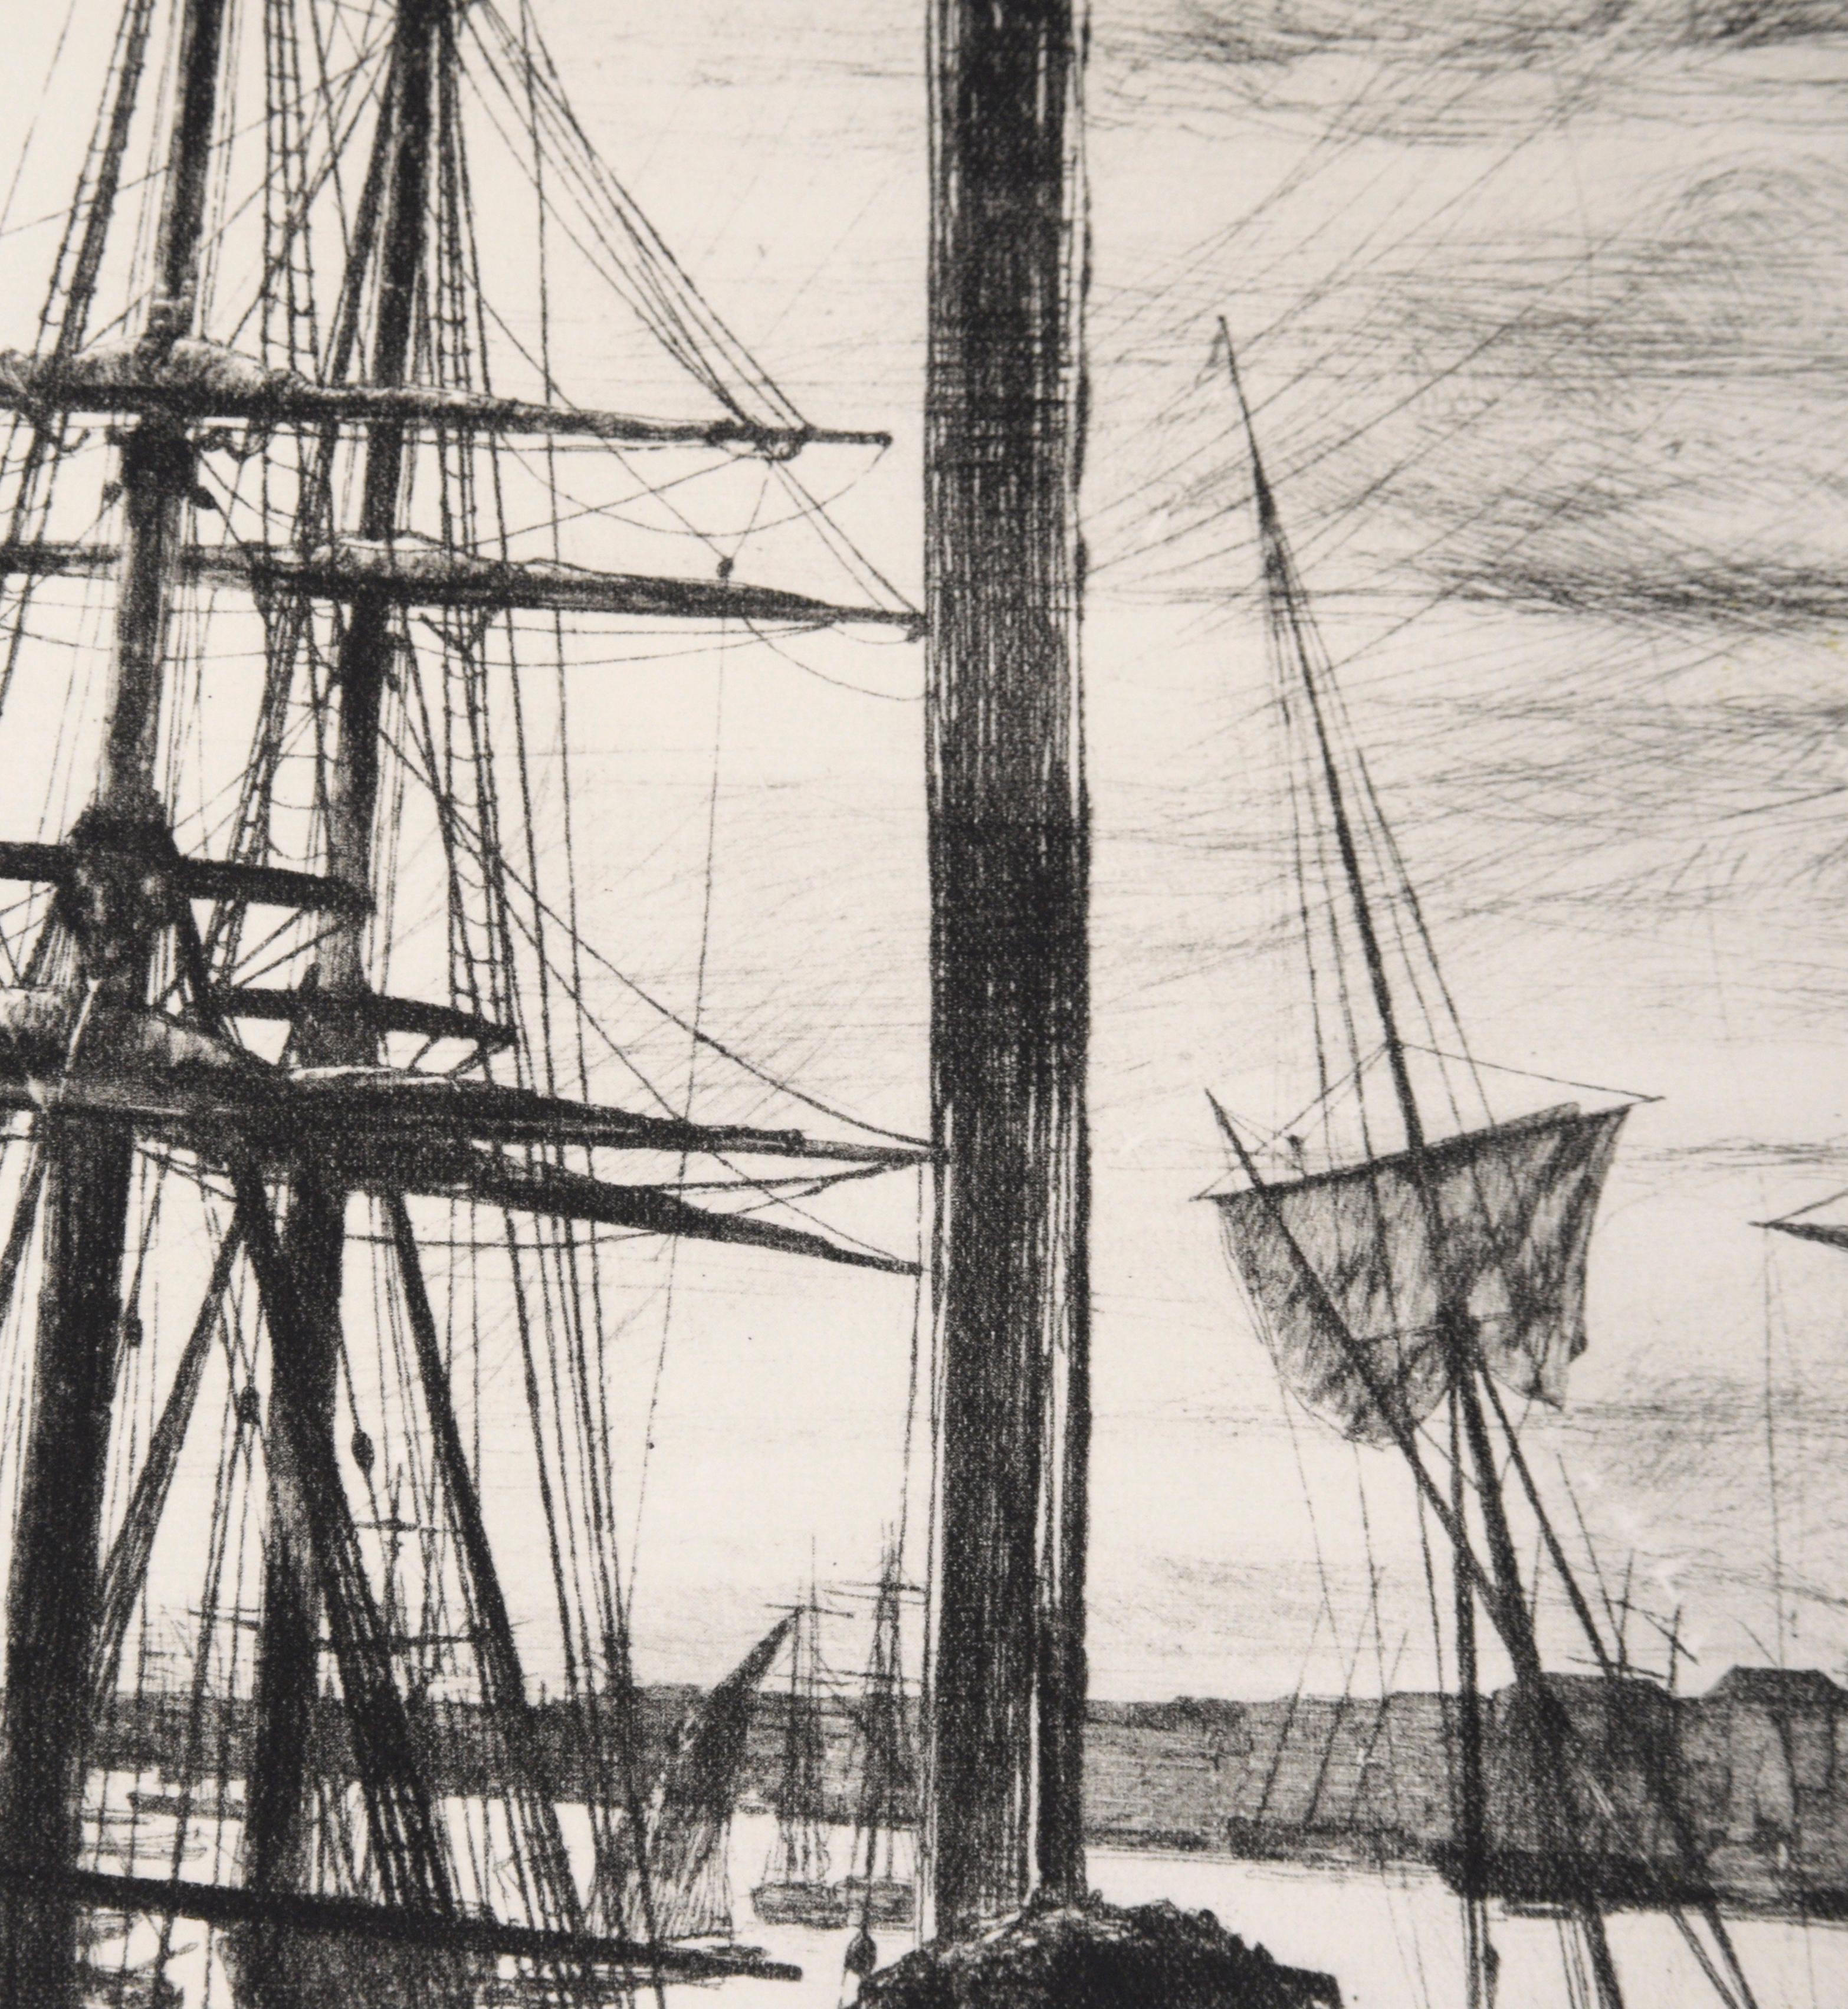 Rotherhithe (Wapping) - Drypoint Etching - Impressionist Print by James Abbott McNeill Whistler